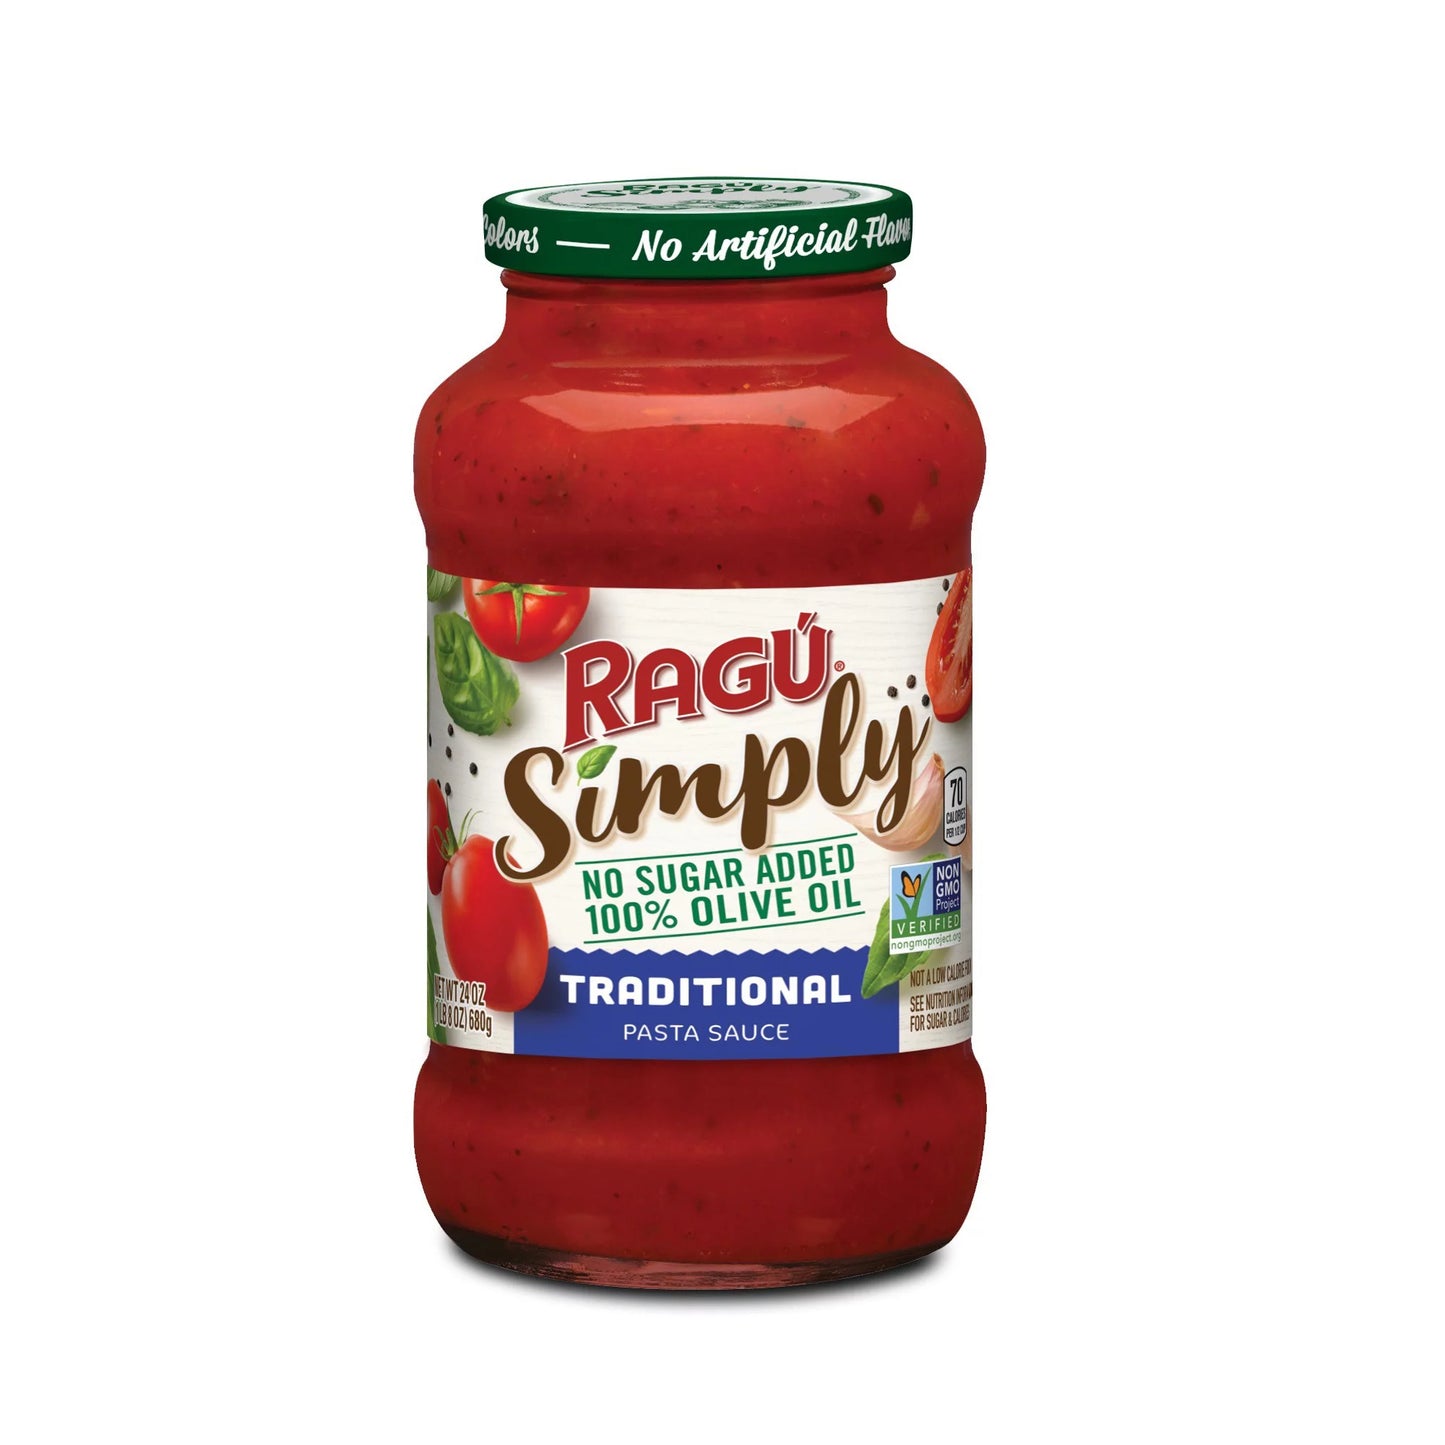 Rag Simply Traditional Pasta Sauce, 24 Oz. (Pack of 2)